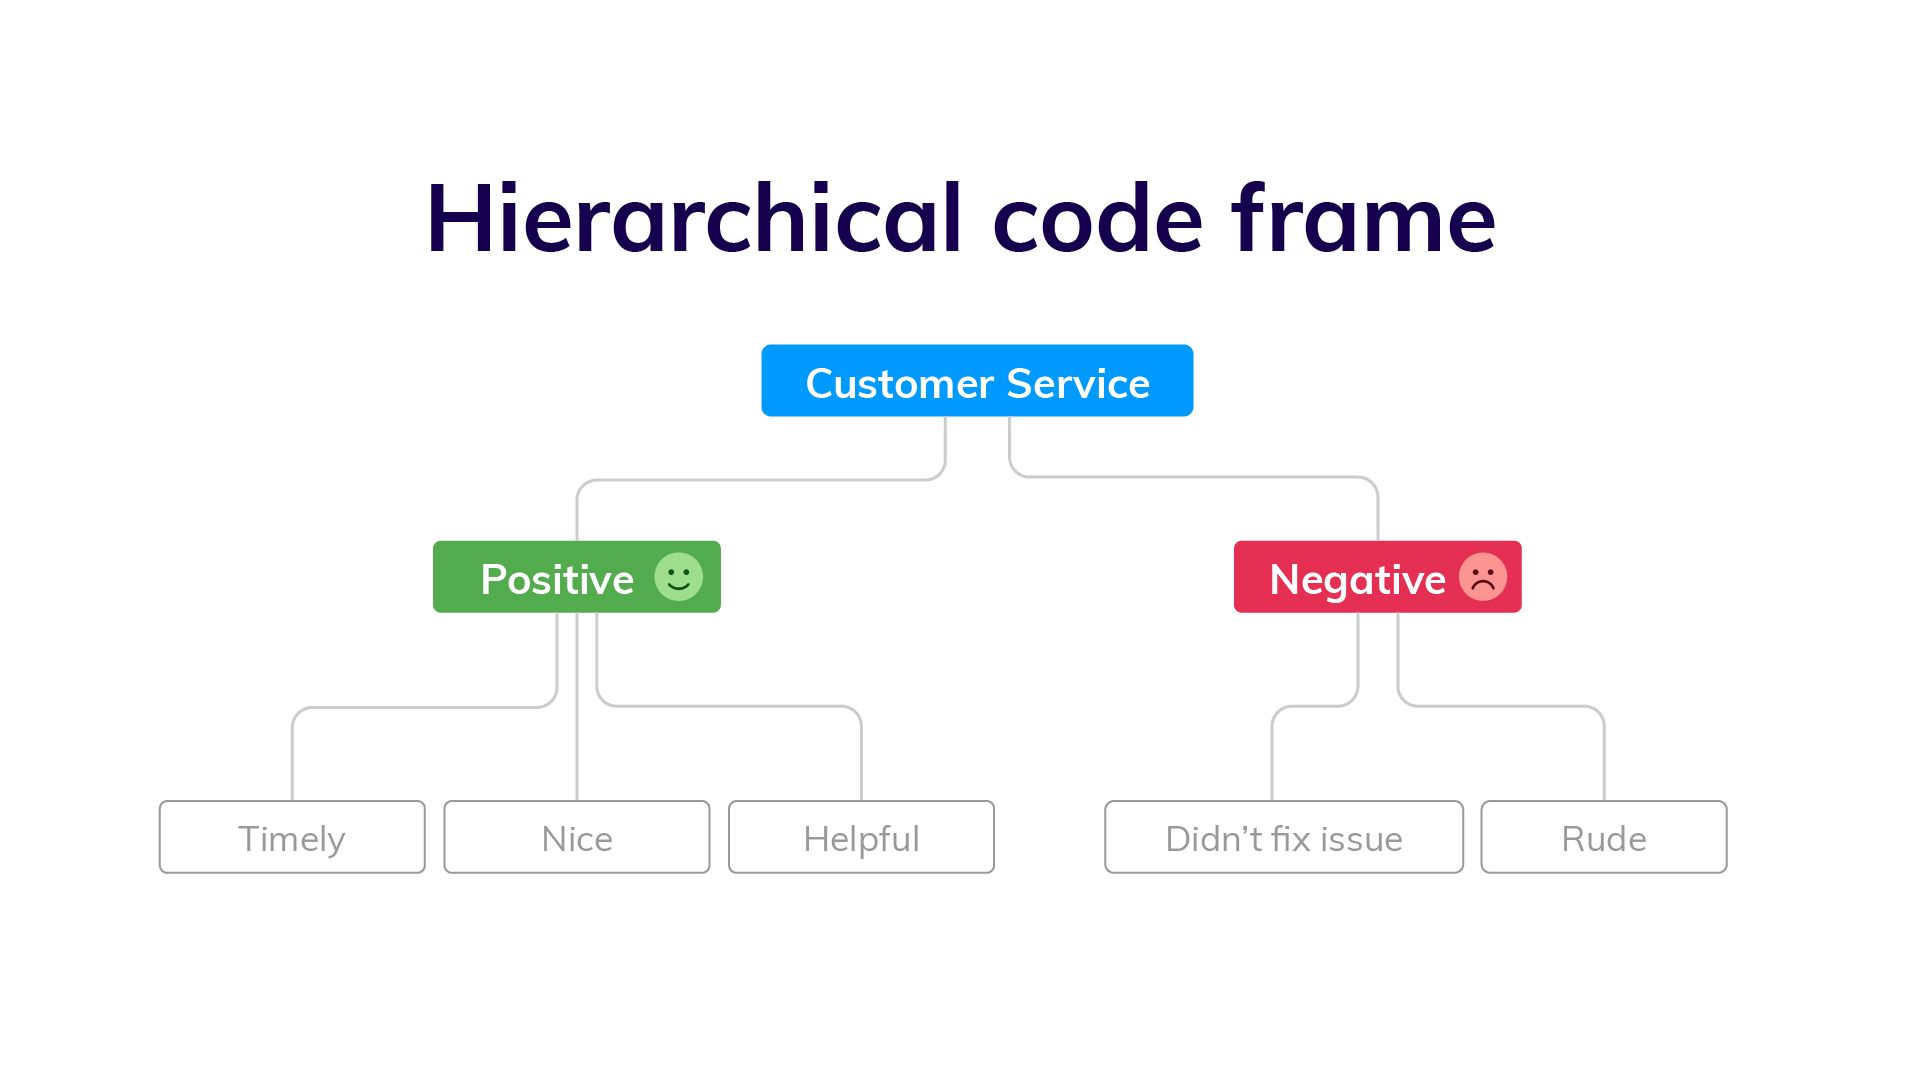 Example of a hierarchical coding frame in qualitative data analysis